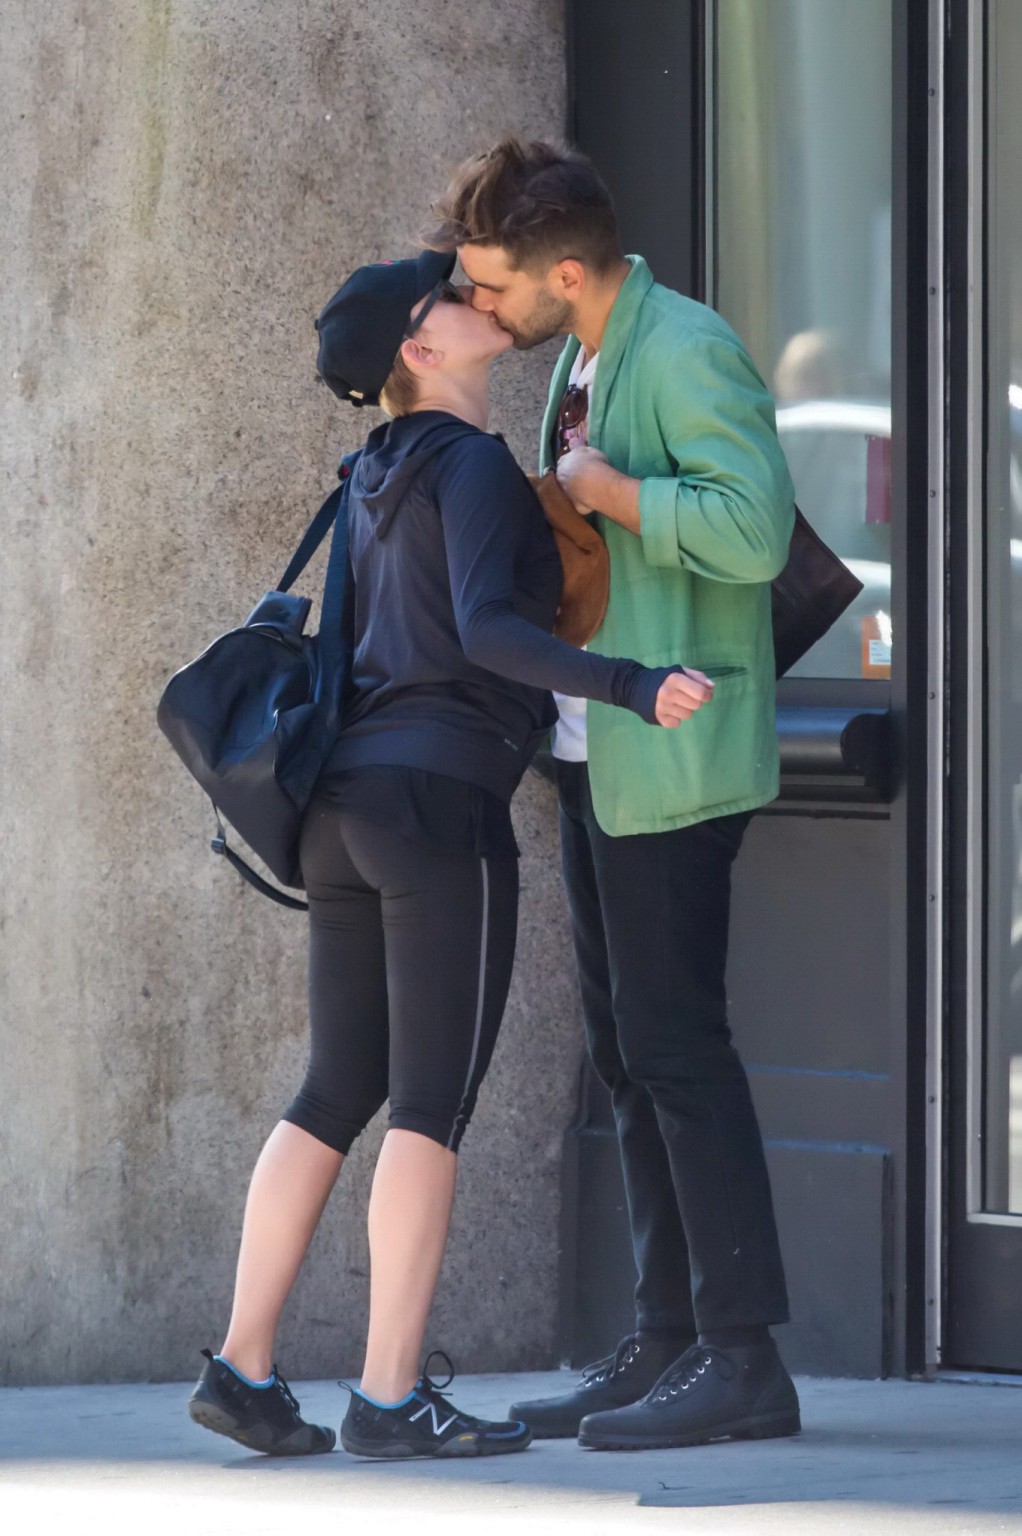 Scarlett Johansson in black leggings getting ass groped while make out in NYC #75184002